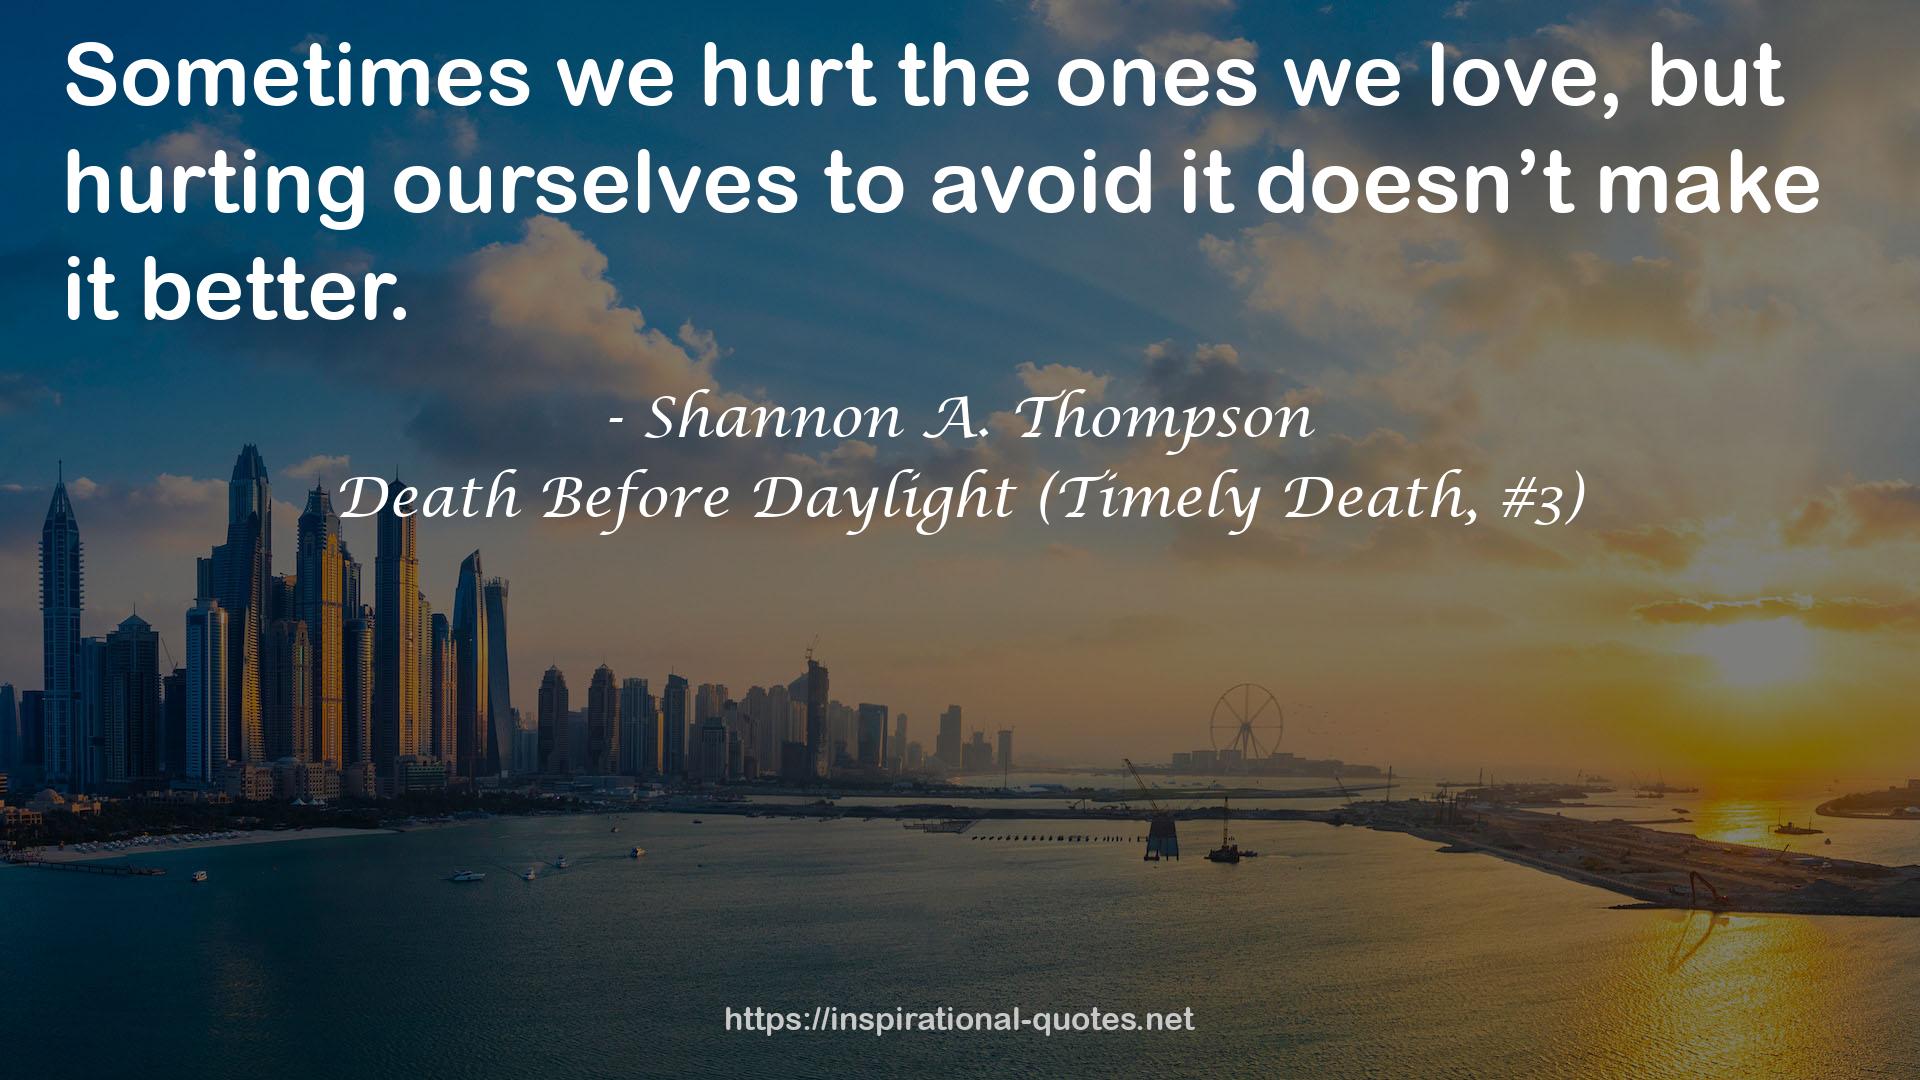 Death Before Daylight (Timely Death, #3) QUOTES